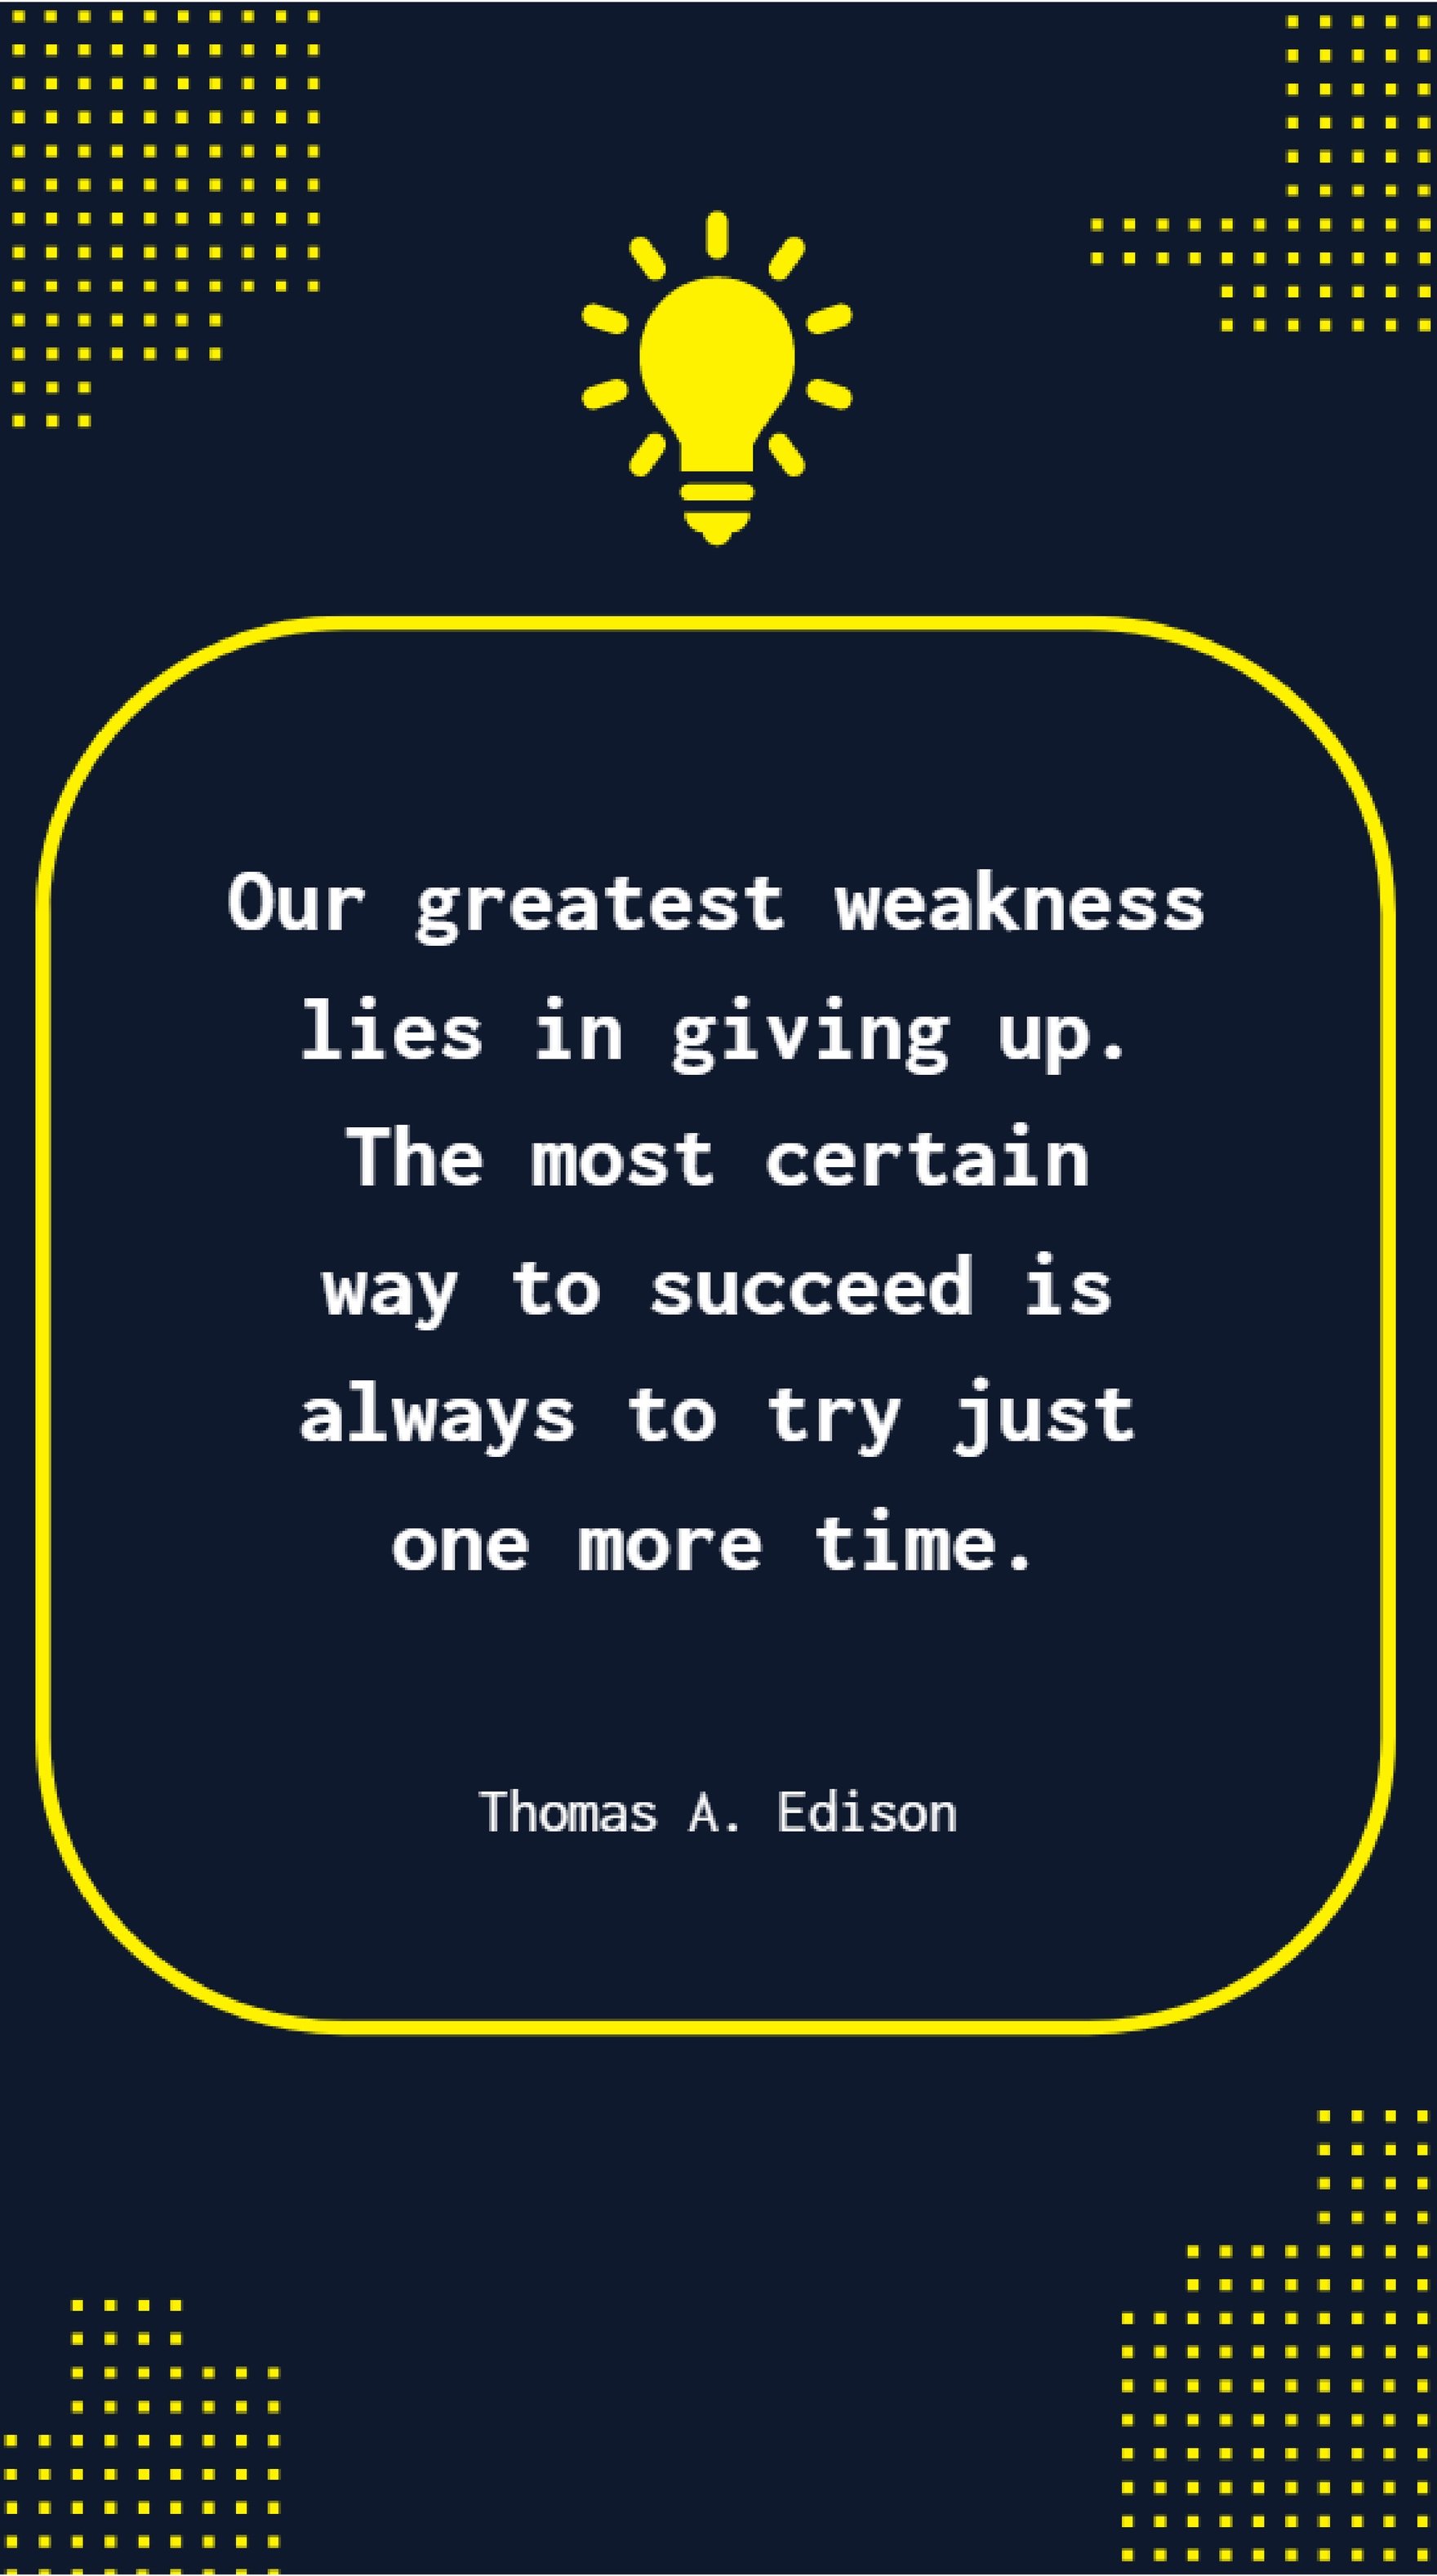 Thomas A. Edison - Our greatest weakness lies in giving up. The most certain way to succeed is always to try just one more time.